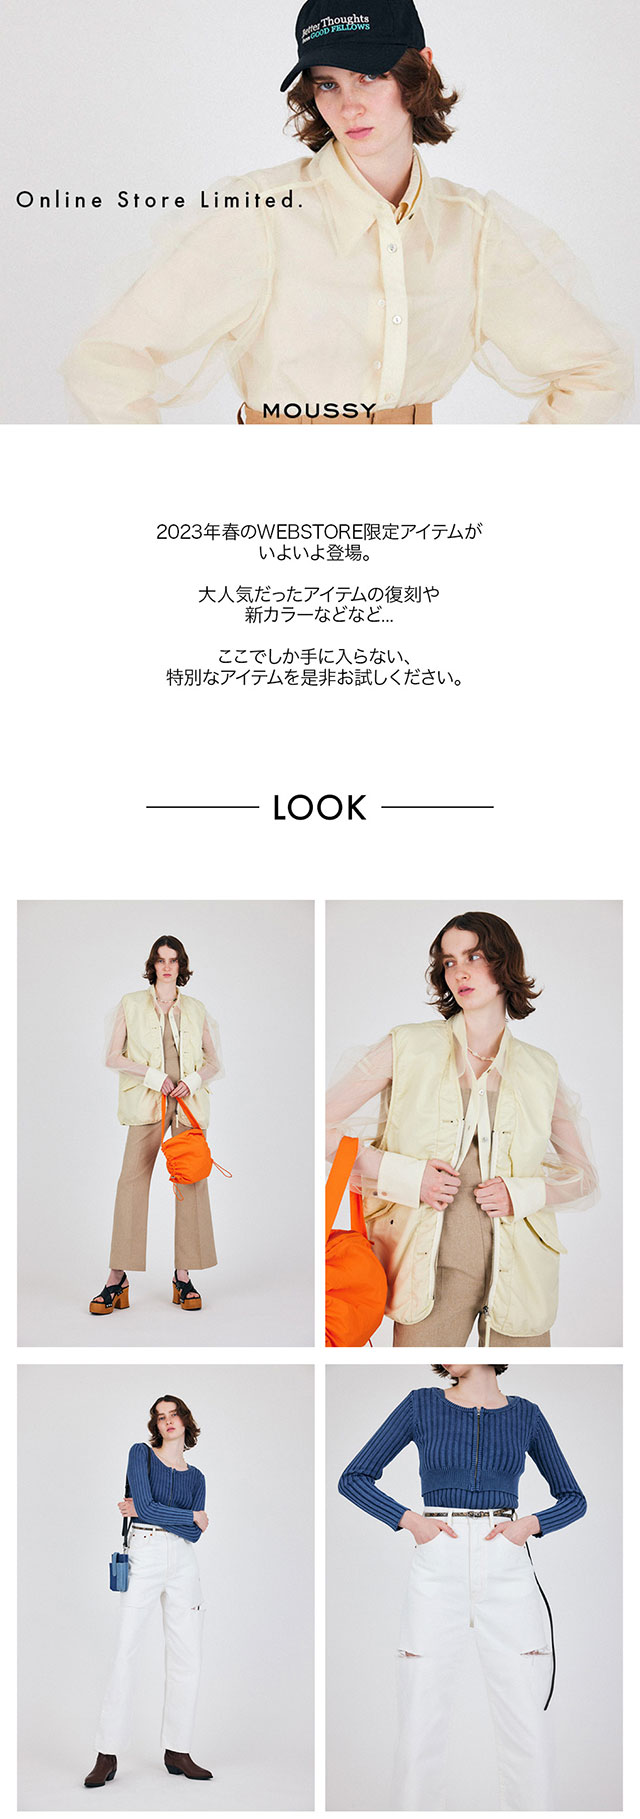 Online Store Limited.】｜バロックジャパンリミテッド 公式通販サイト ...